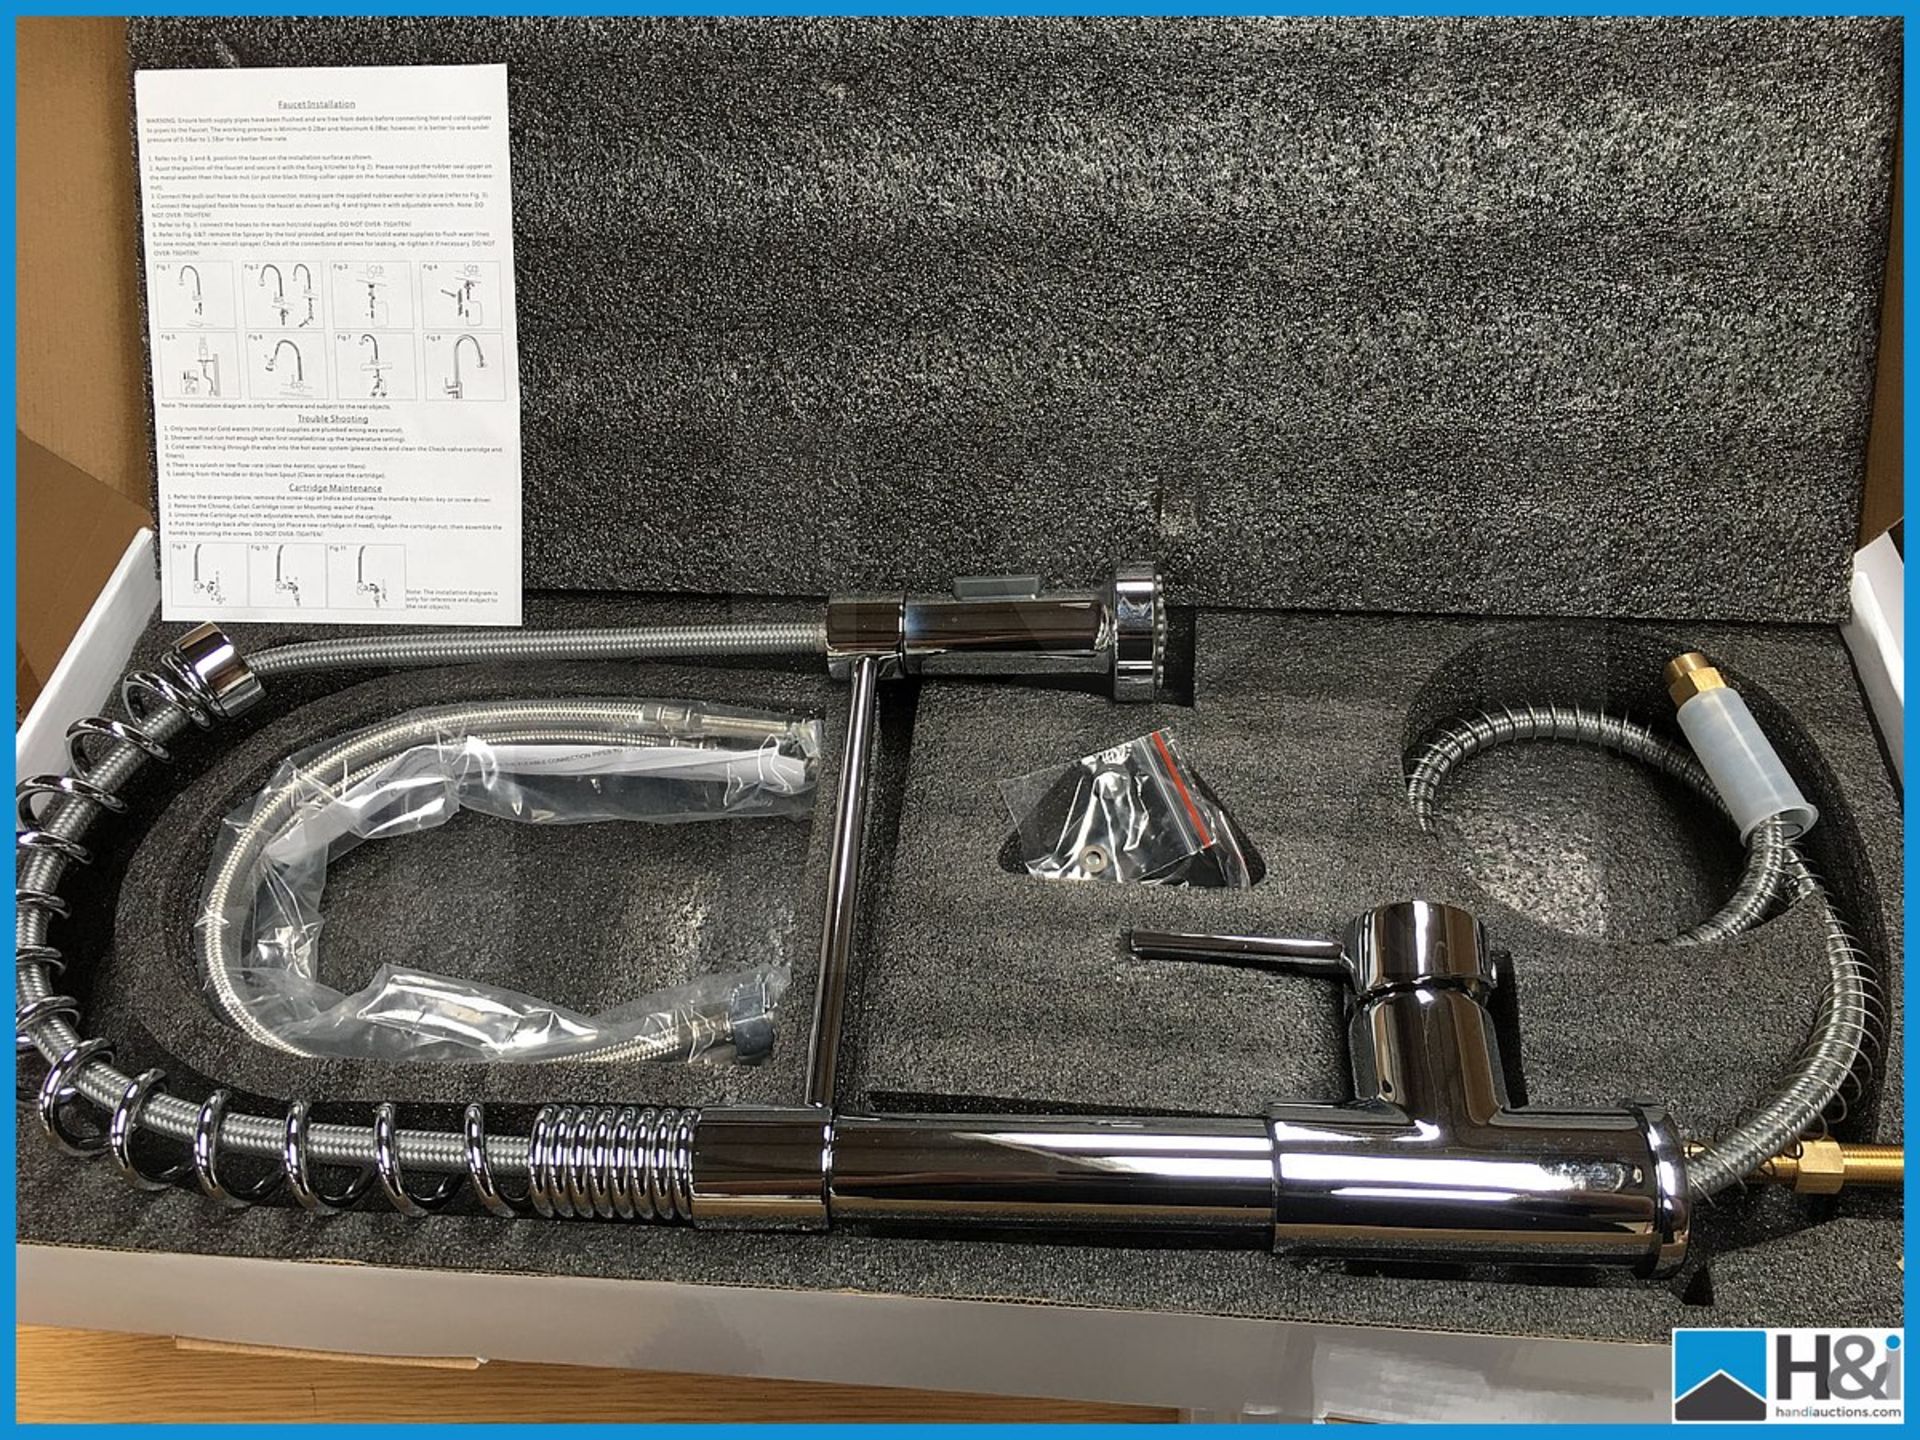 Designer polished chrome finish sprung neck pull down mono kitchen mixer. New and boxed. Suggested